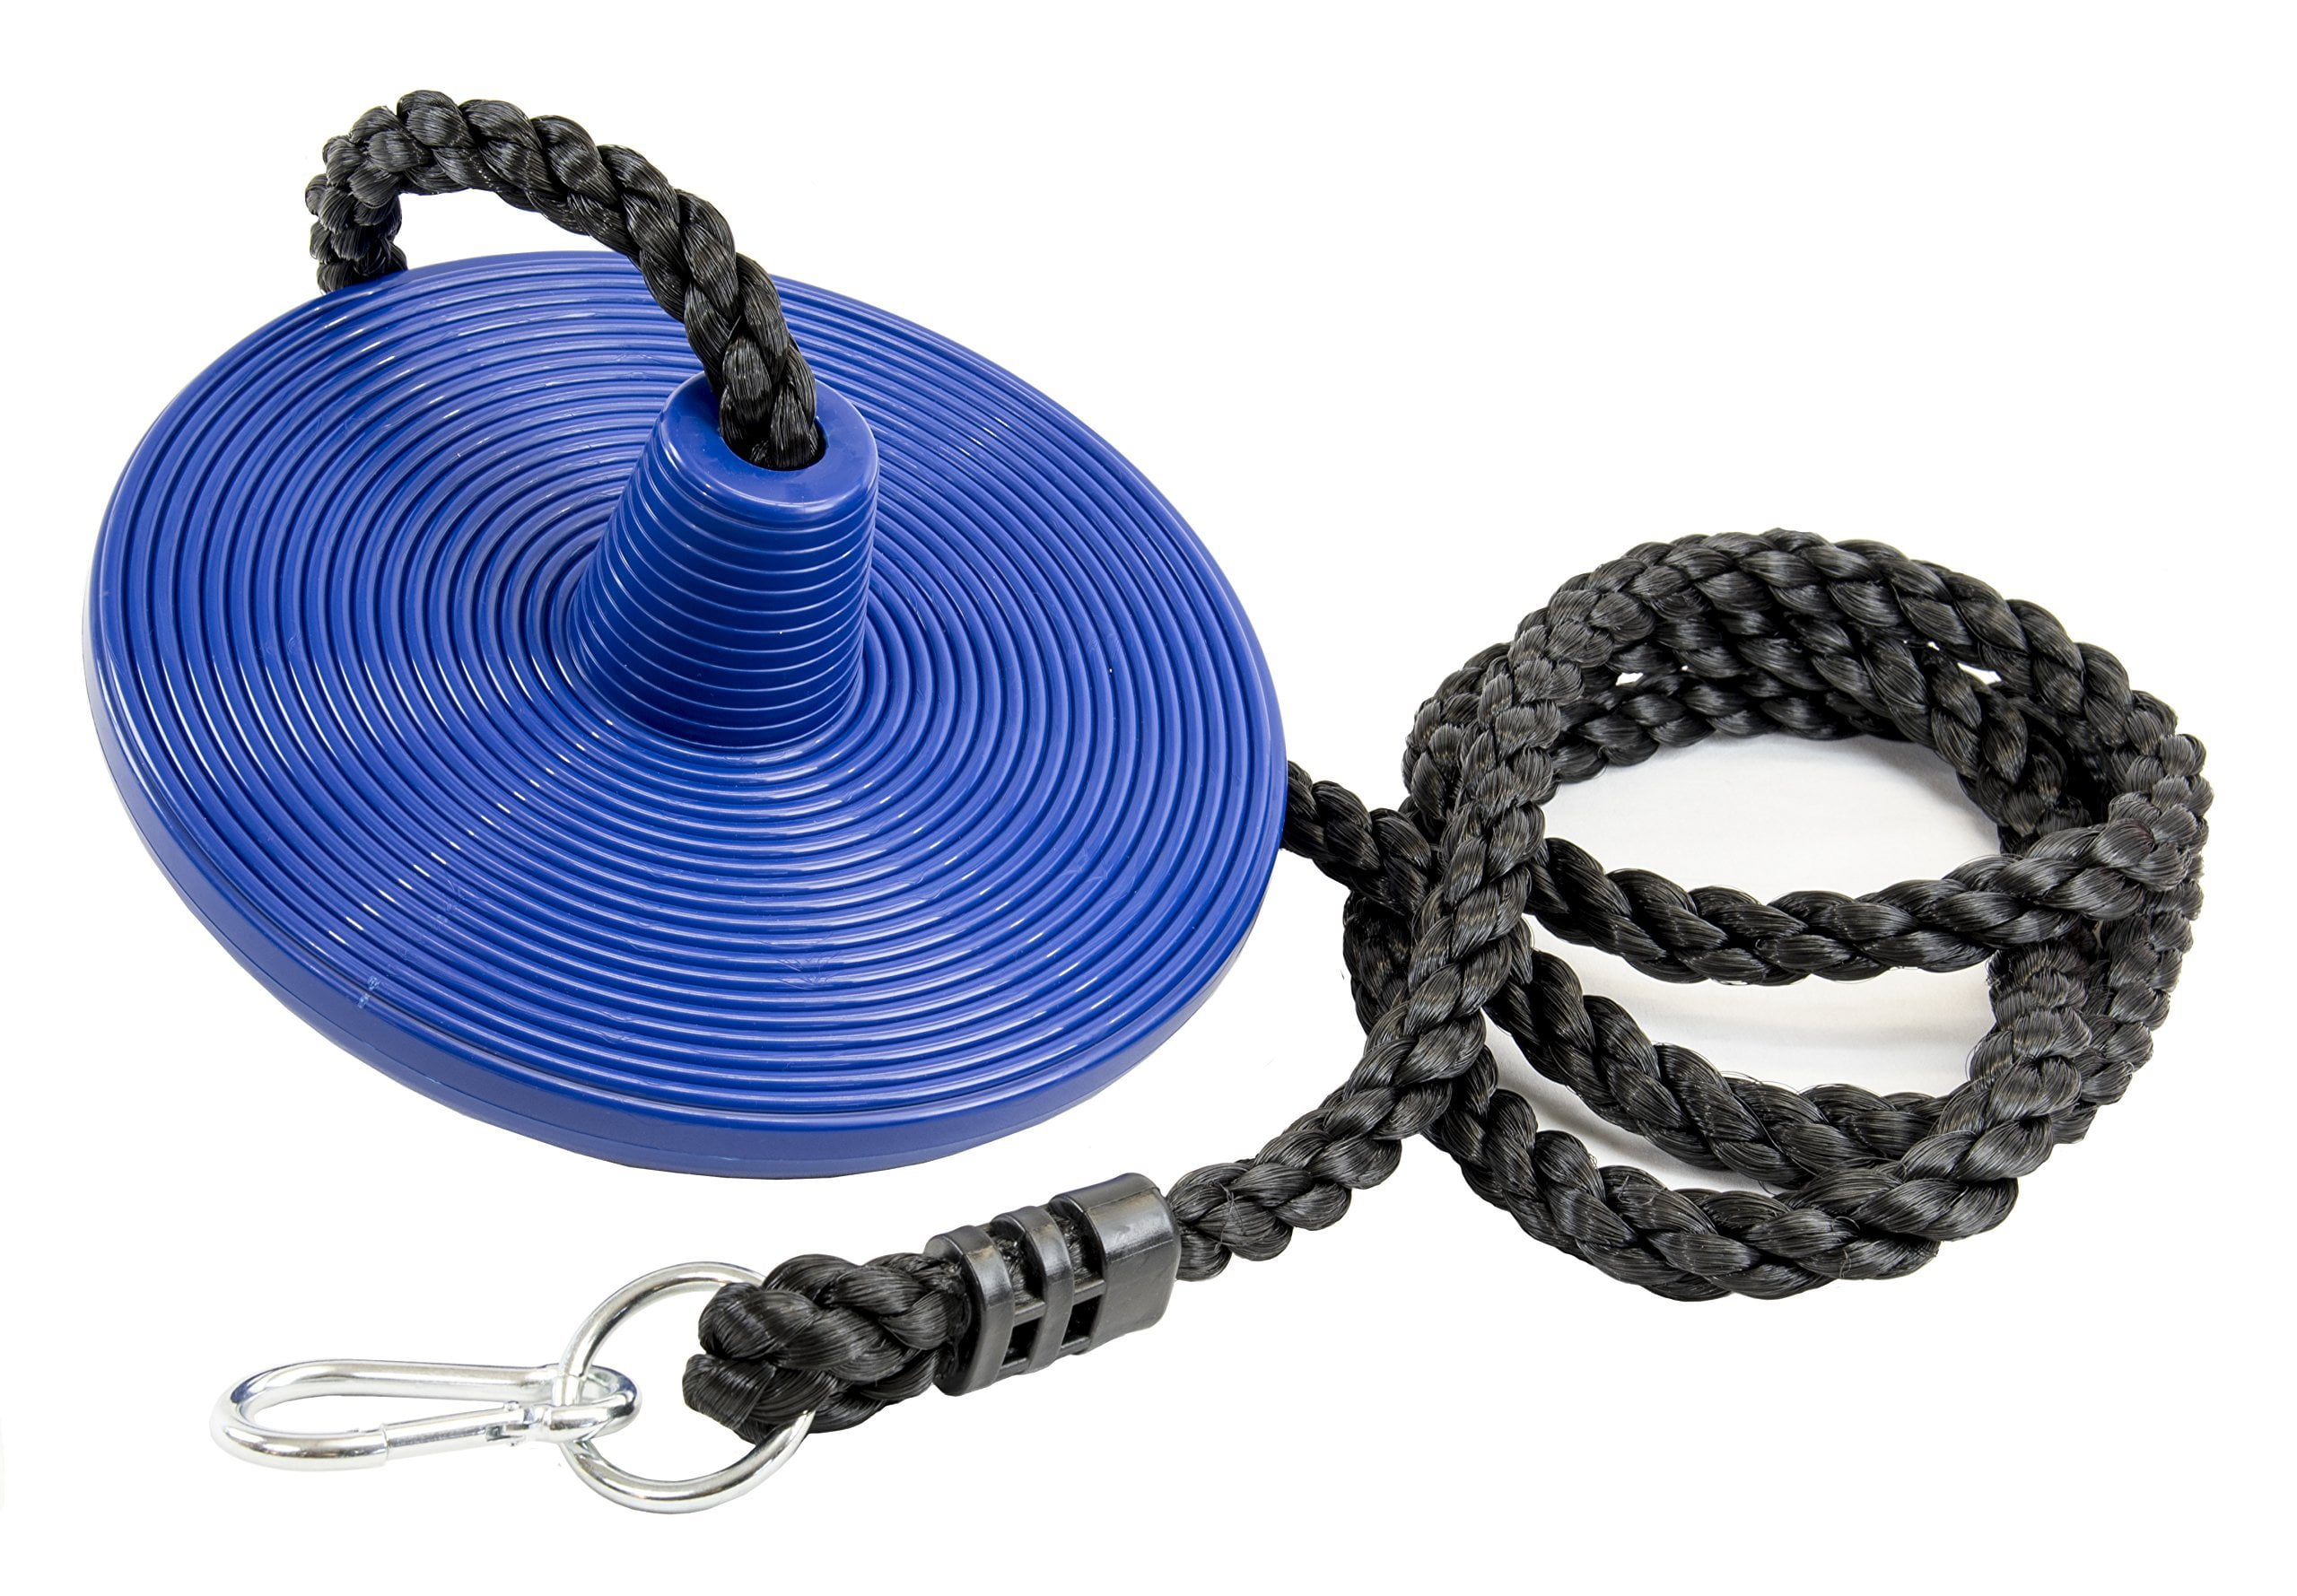 with Leg Safety Protector /& 1 Heavy Duty Rope Squirrel Products Tree Swing Disc Rope Swing